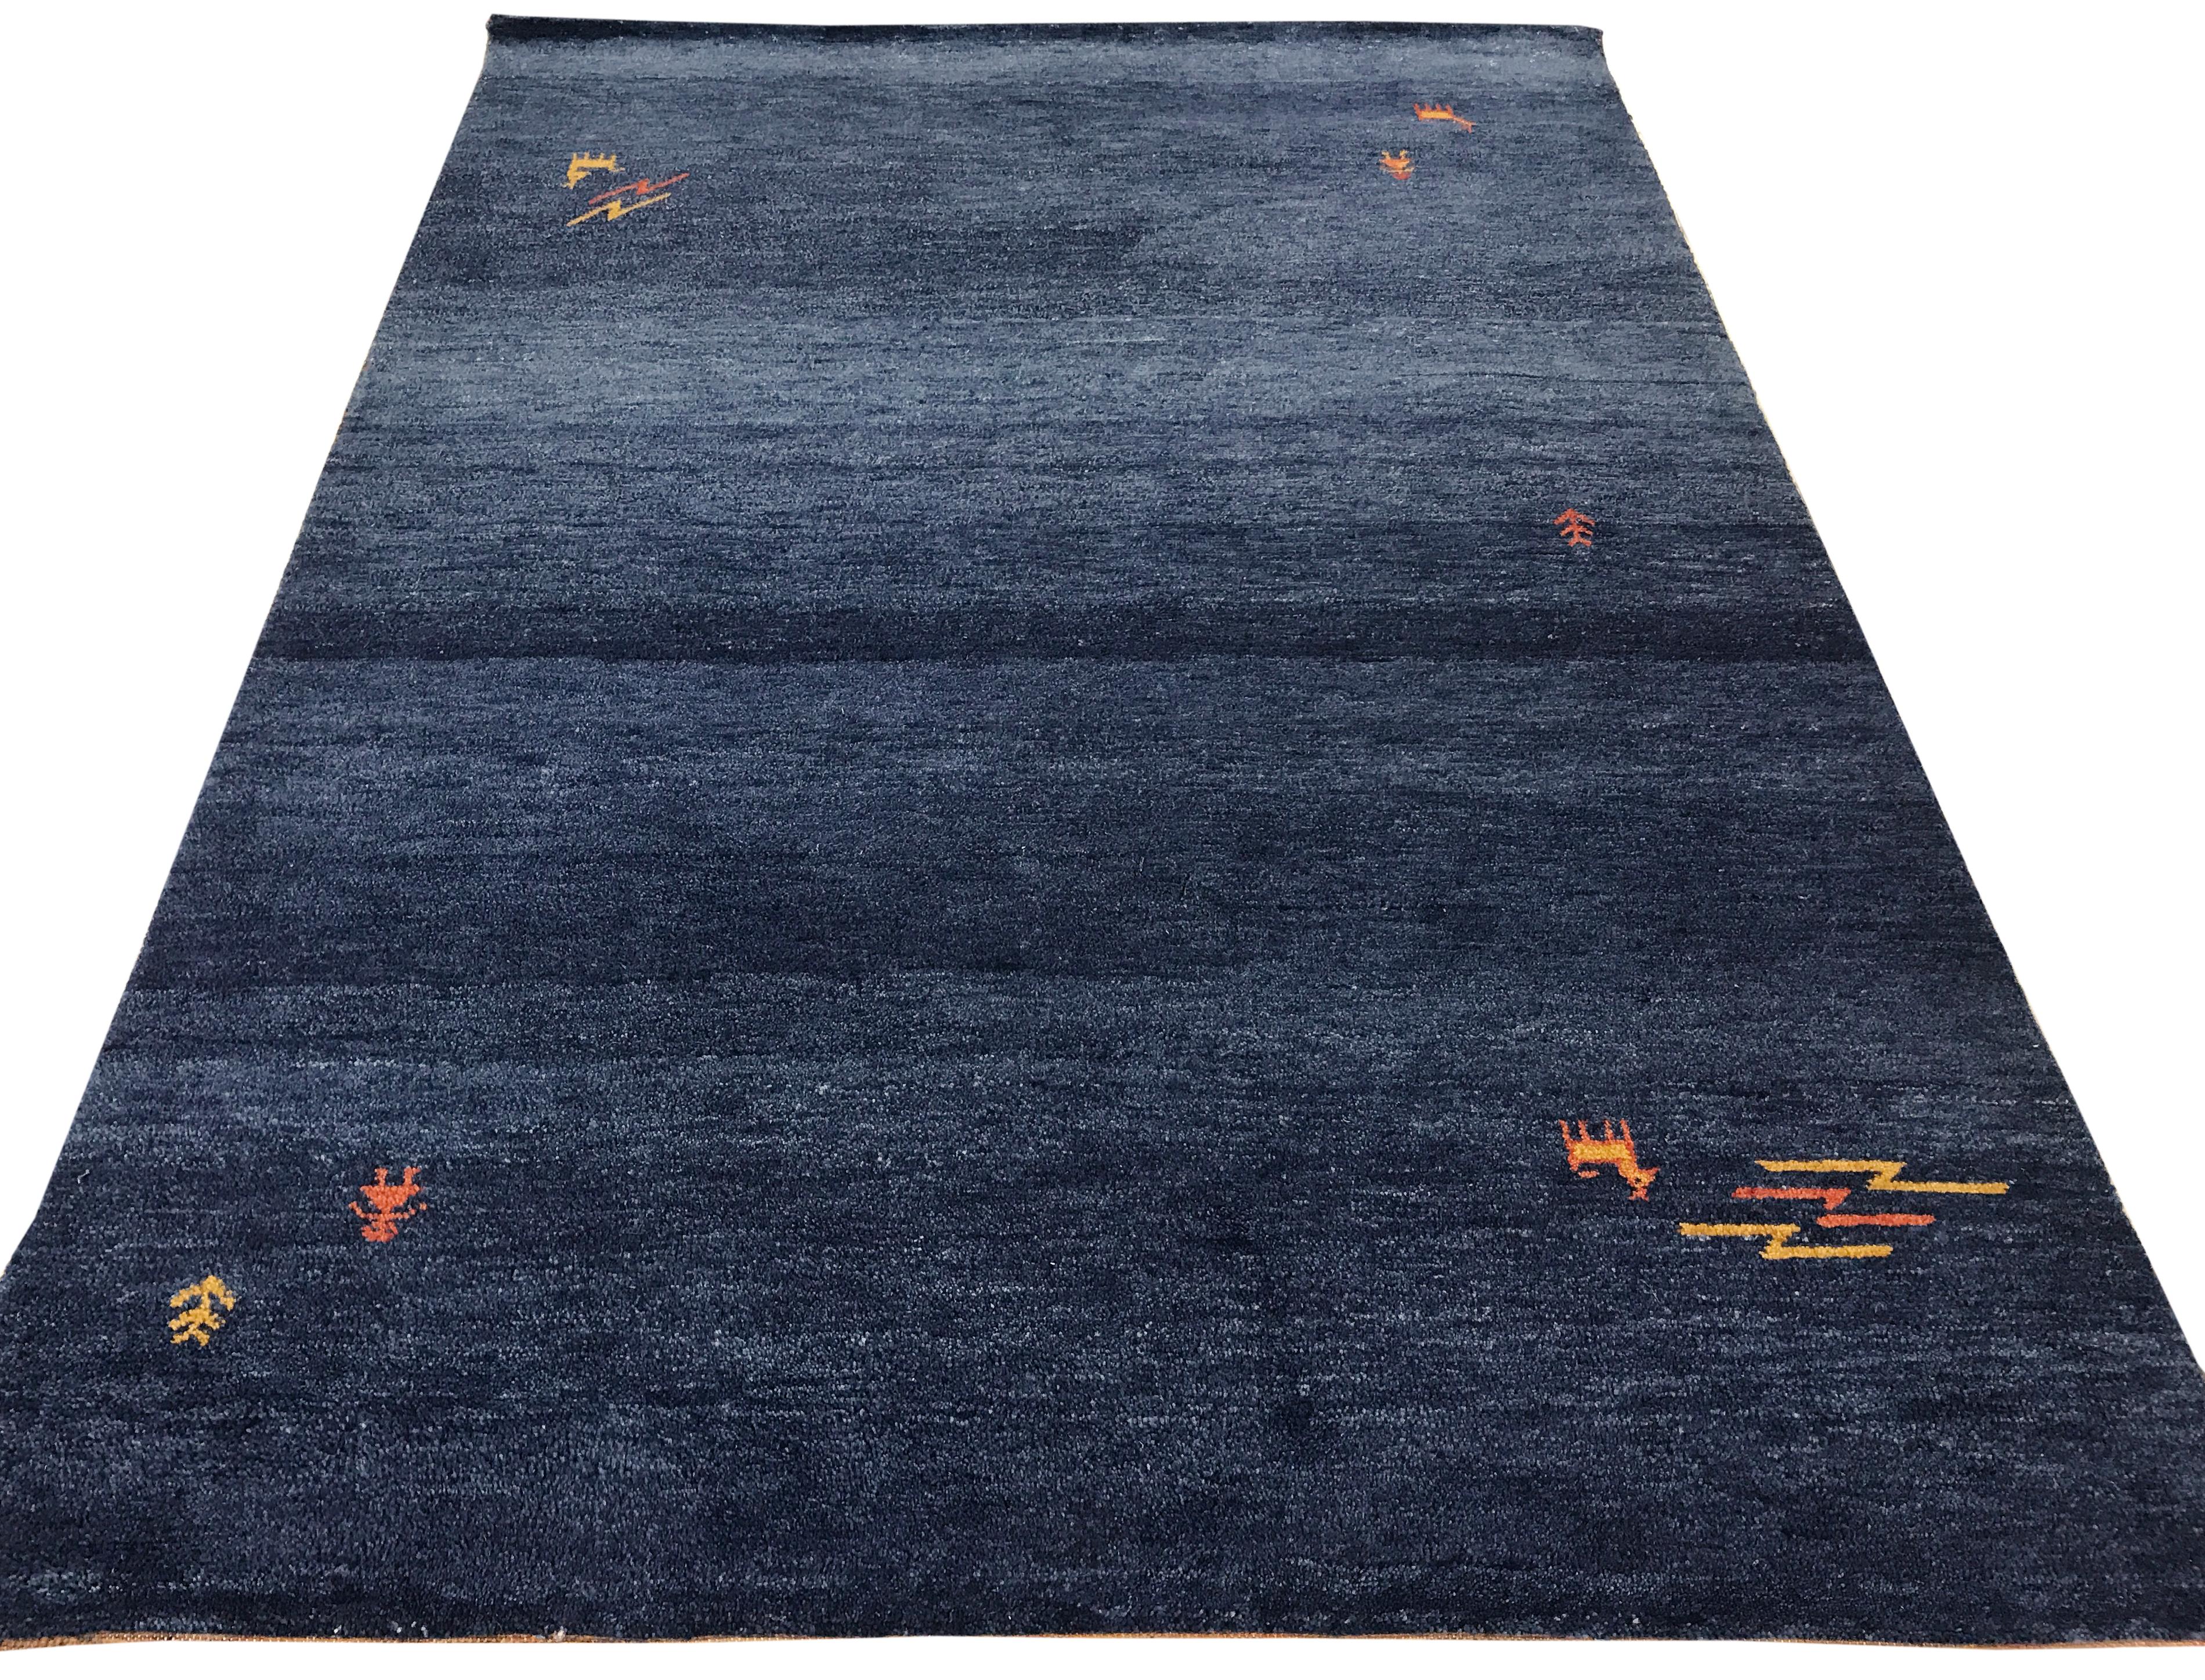 Hand-Knotted Dark Blue Wool Gabbeh Style Area Rug with Tribal Elements